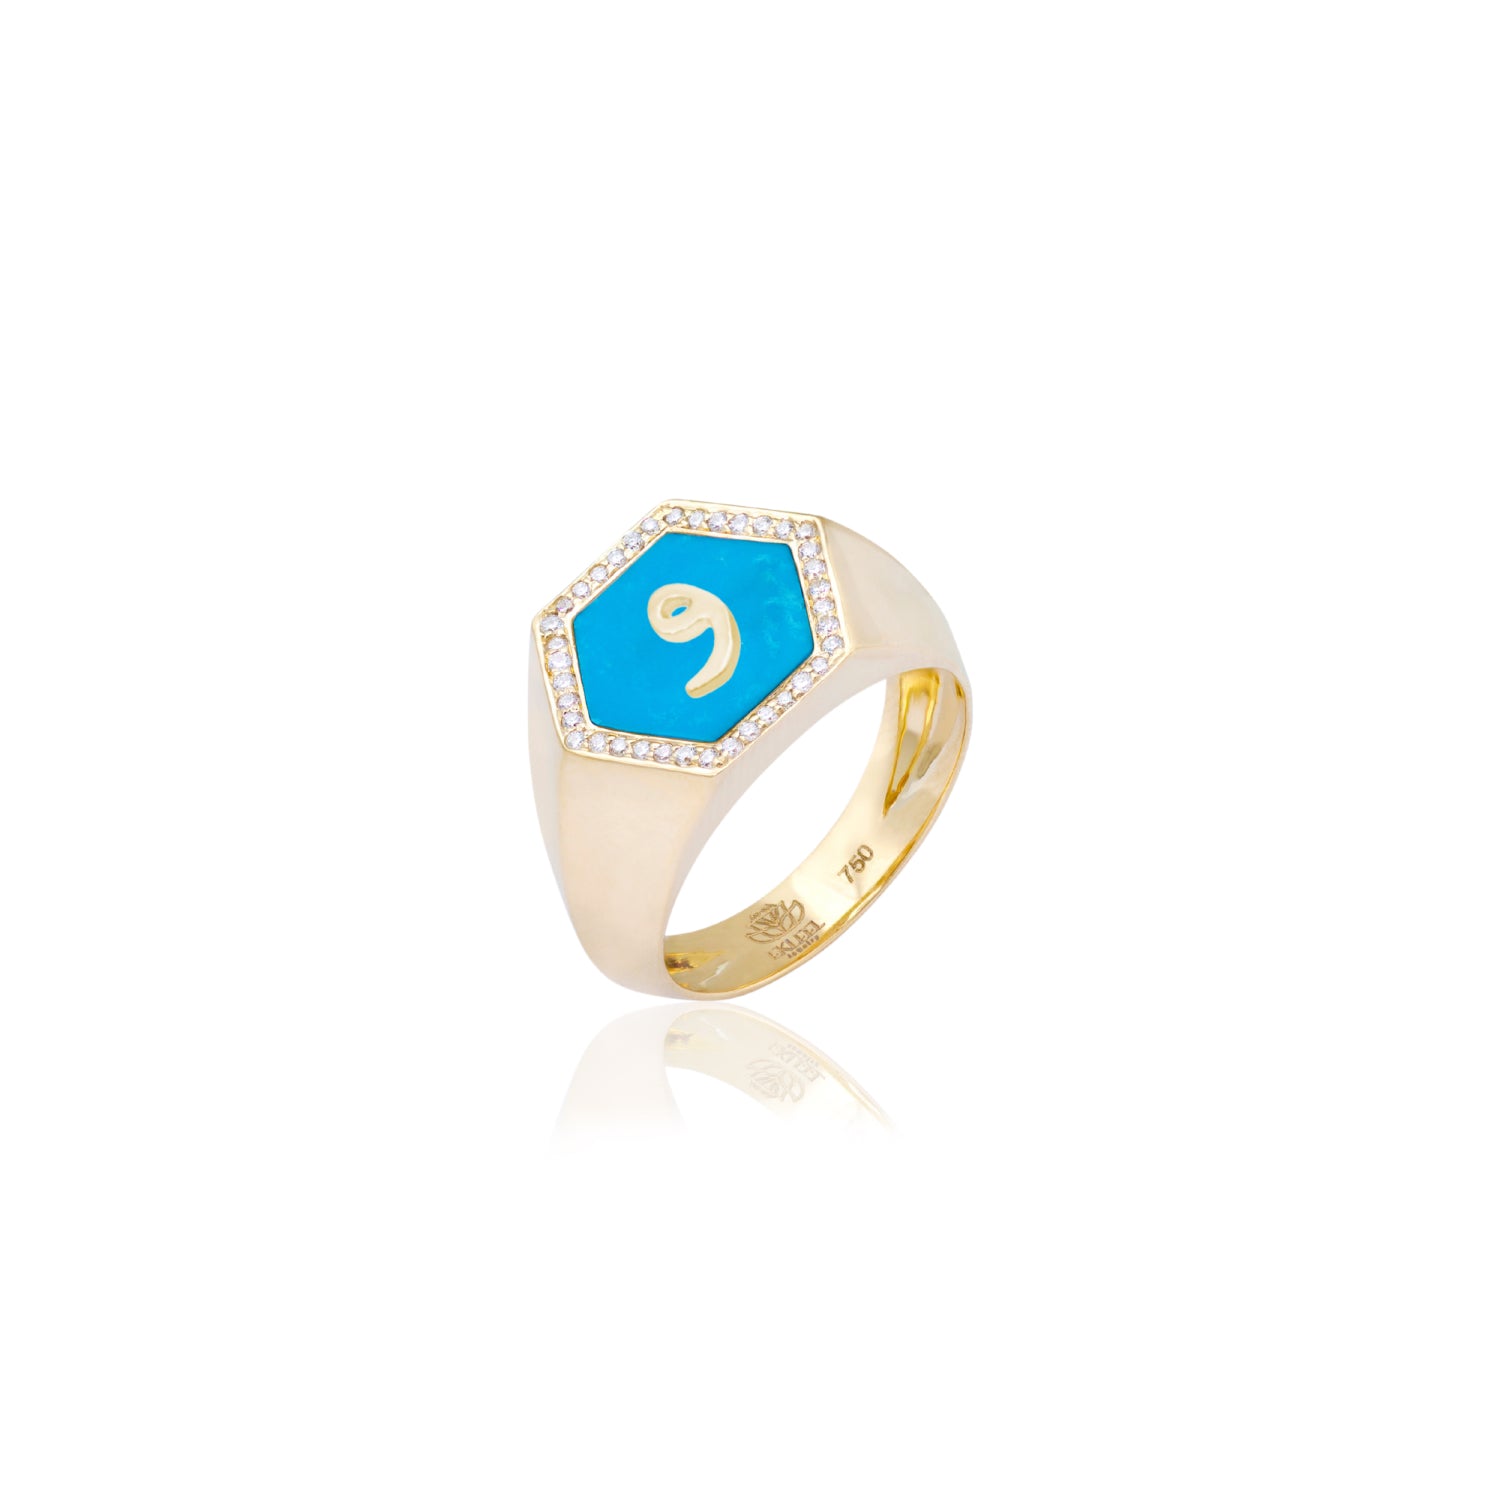 Qamoos 2.0 Letter و Turquoise and Diamond Signet Ring in Yellow Gold